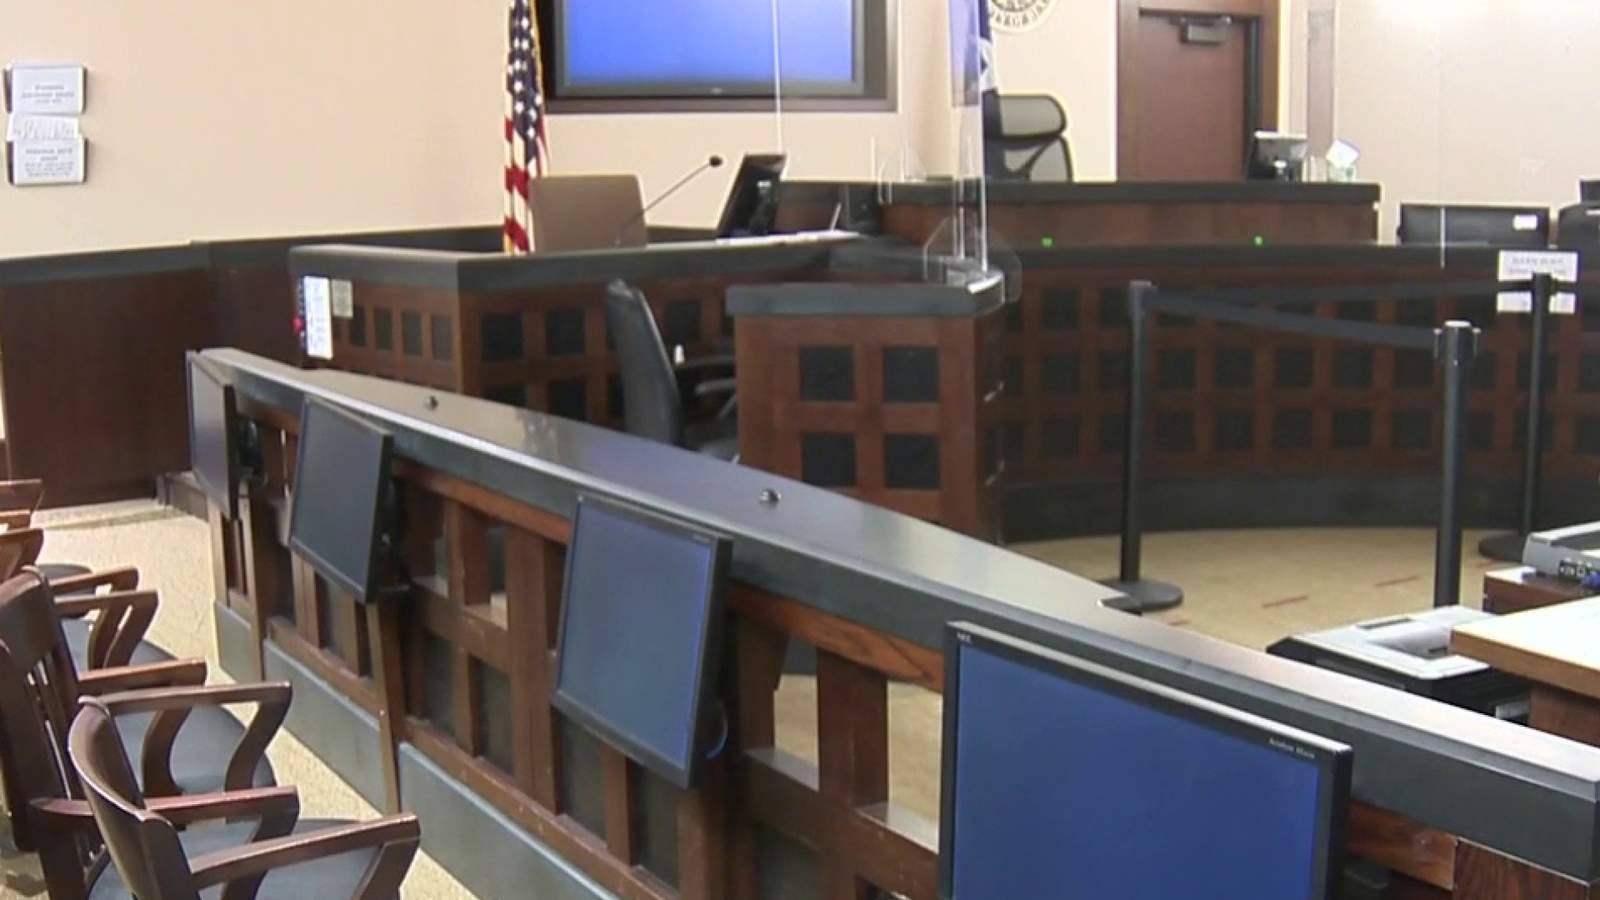 In-person jury trials in Bexar County to resume in June